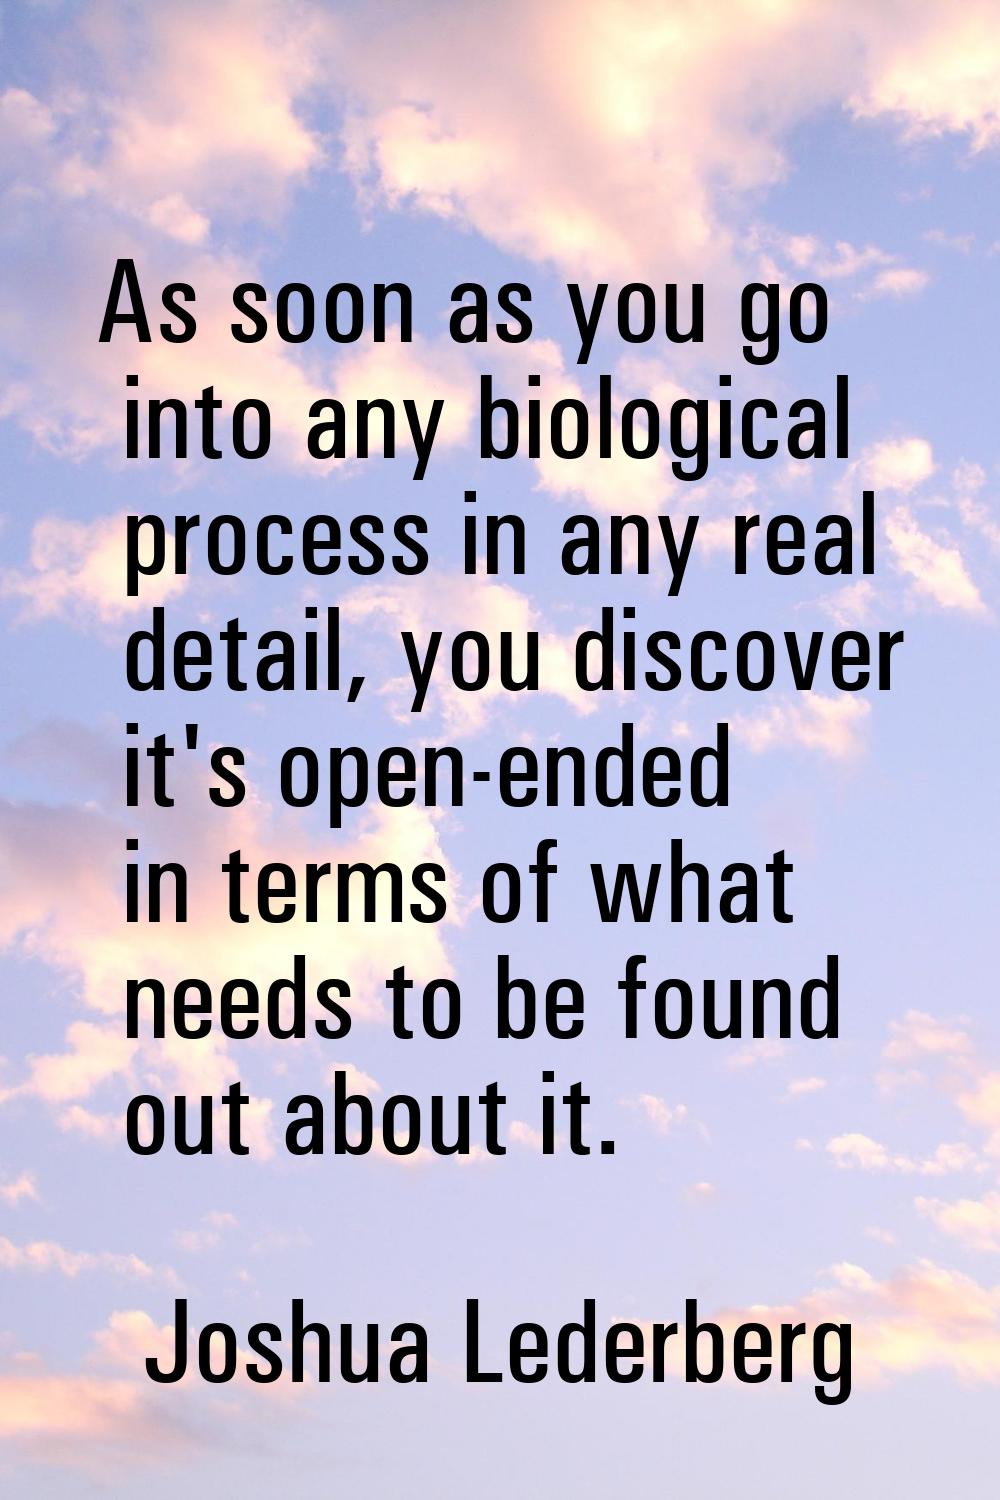 As soon as you go into any biological process in any real detail, you discover it's open-ended in t